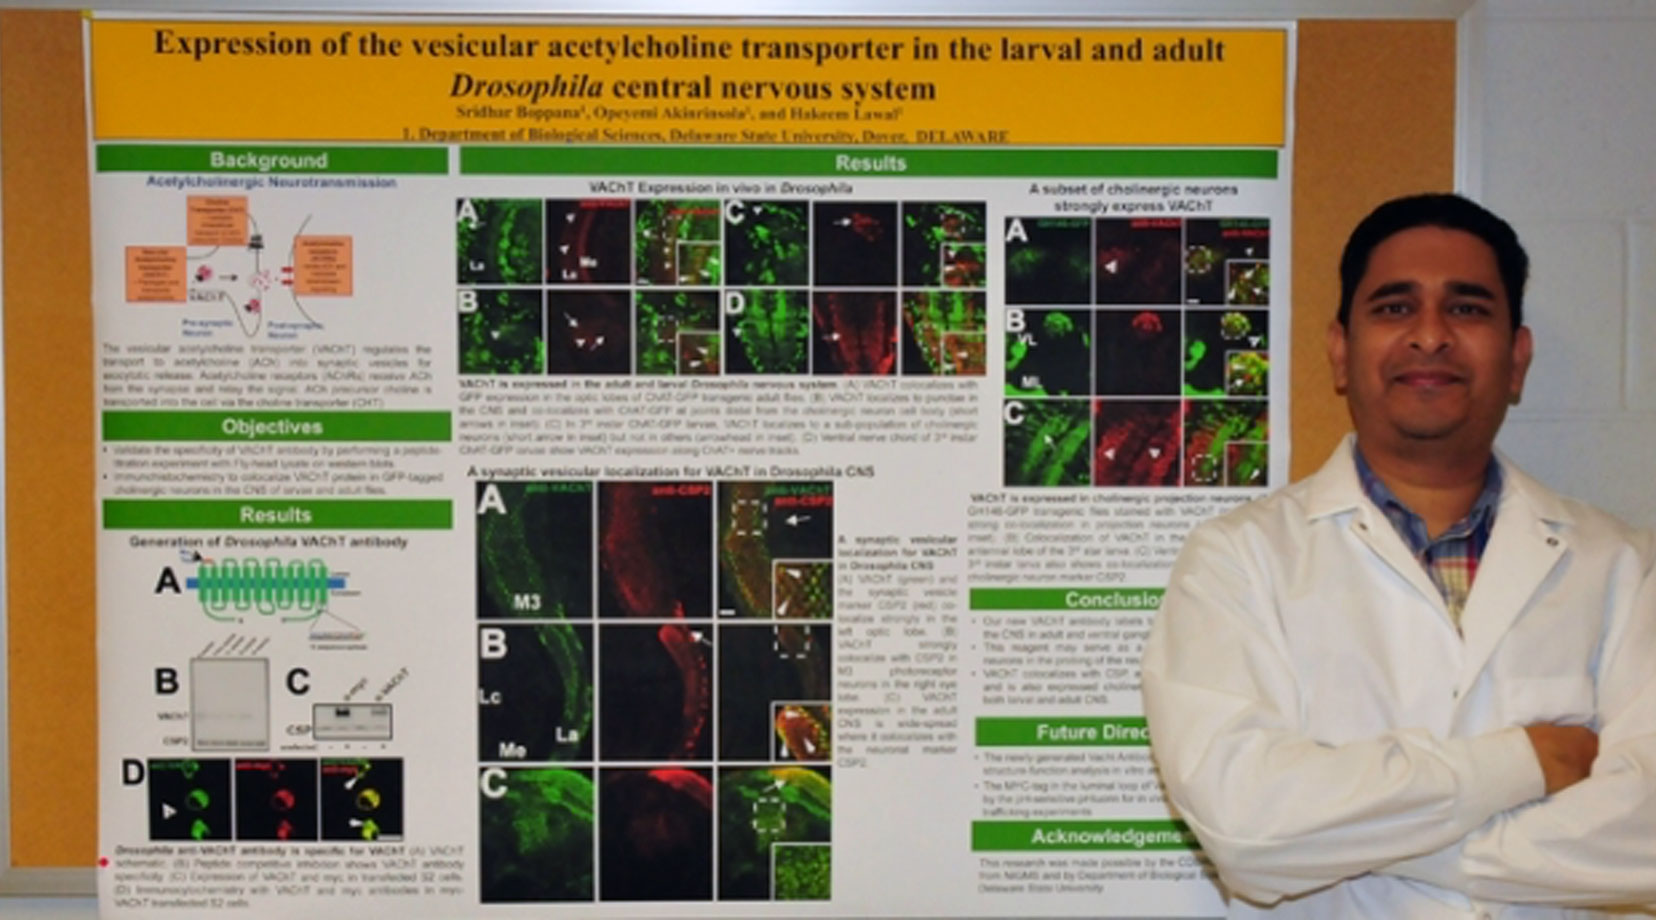 Dr. Sridhar Boppana recently took first place in the postdoctoral division in the Delaware Neuroscience Symposium Research Poster Competition.